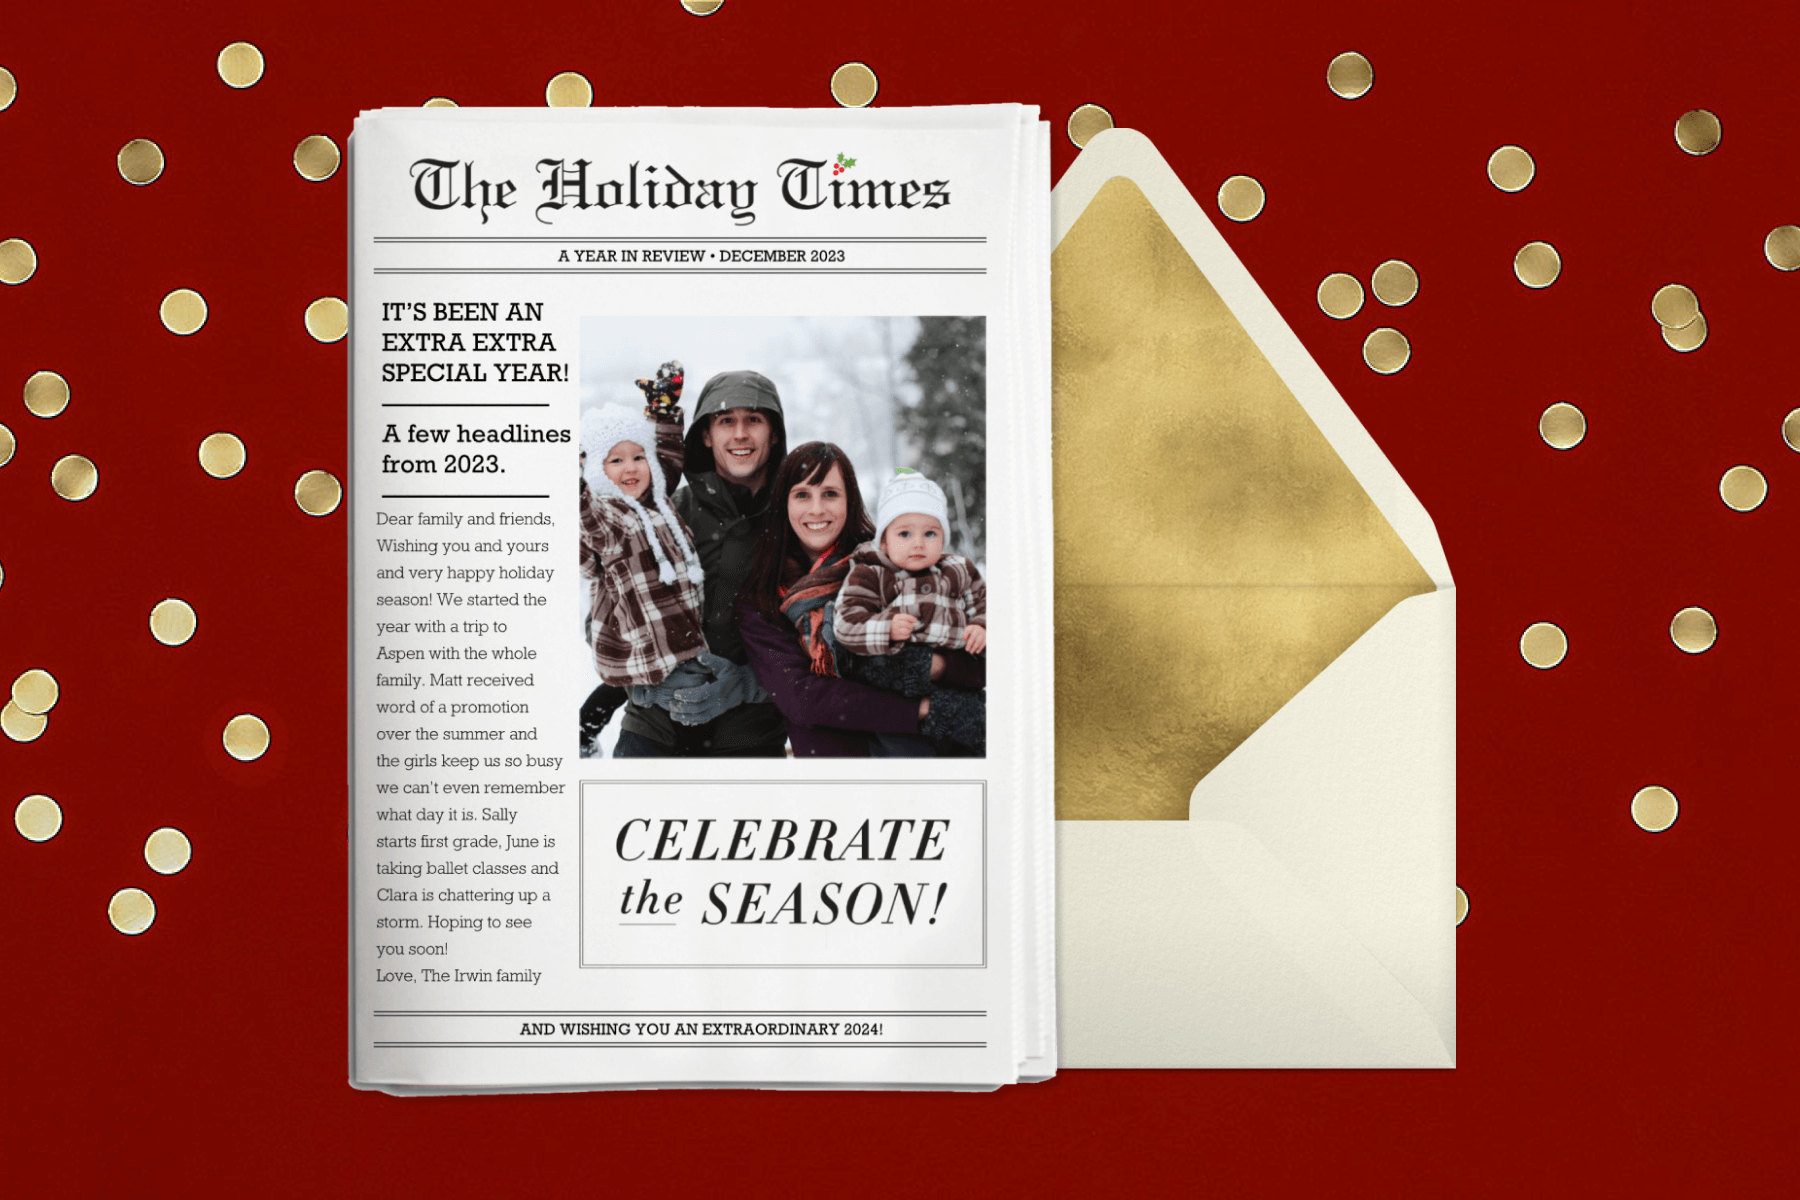 A card that looks like a newspaper front page of “The Holiday Times” with a photo of a family.